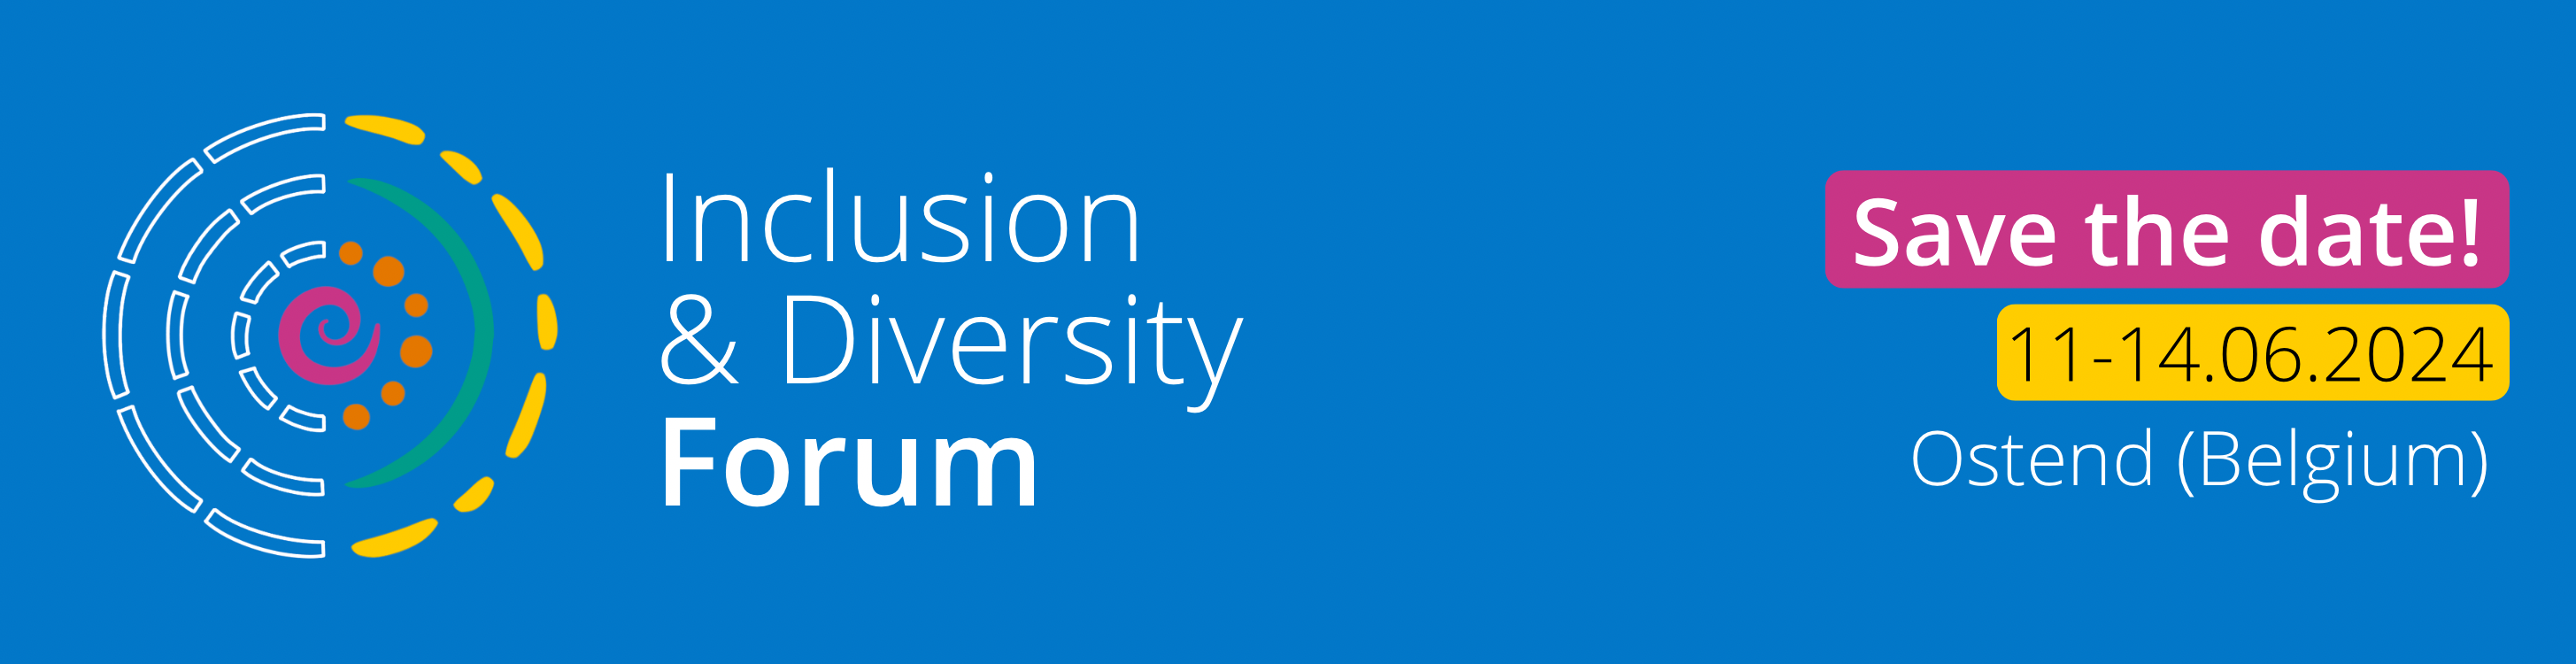 Picture: Inclusion and diversity forum, save the date! Ostend, Belgium, from November 29 to December 2, 2021